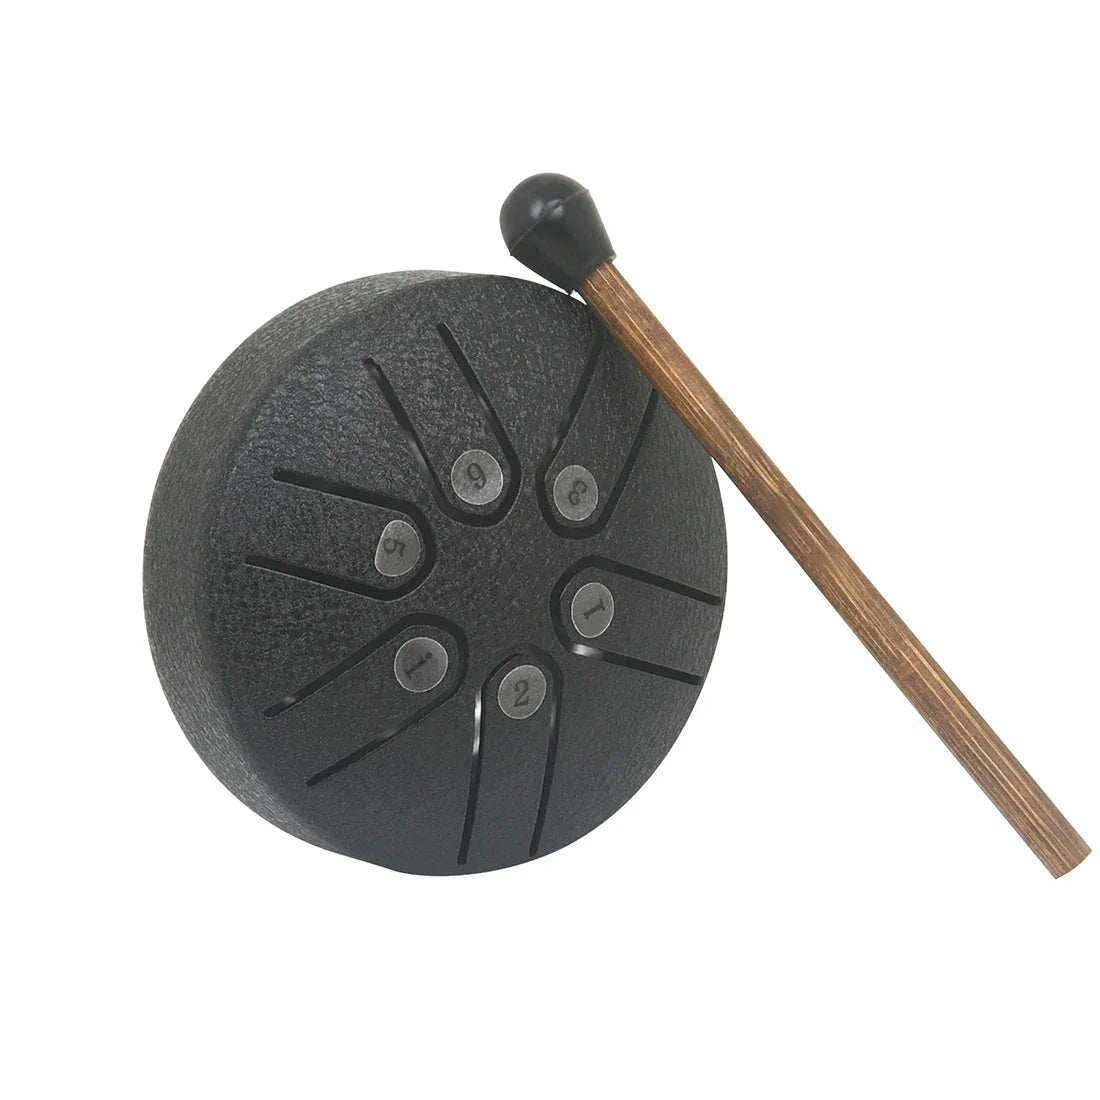 3 Inch 6-Tone Steel Tongue Hand Drum Mine Empty Drums With Drumsticks Beginners Percussion Musical Instruments Children's Gifts